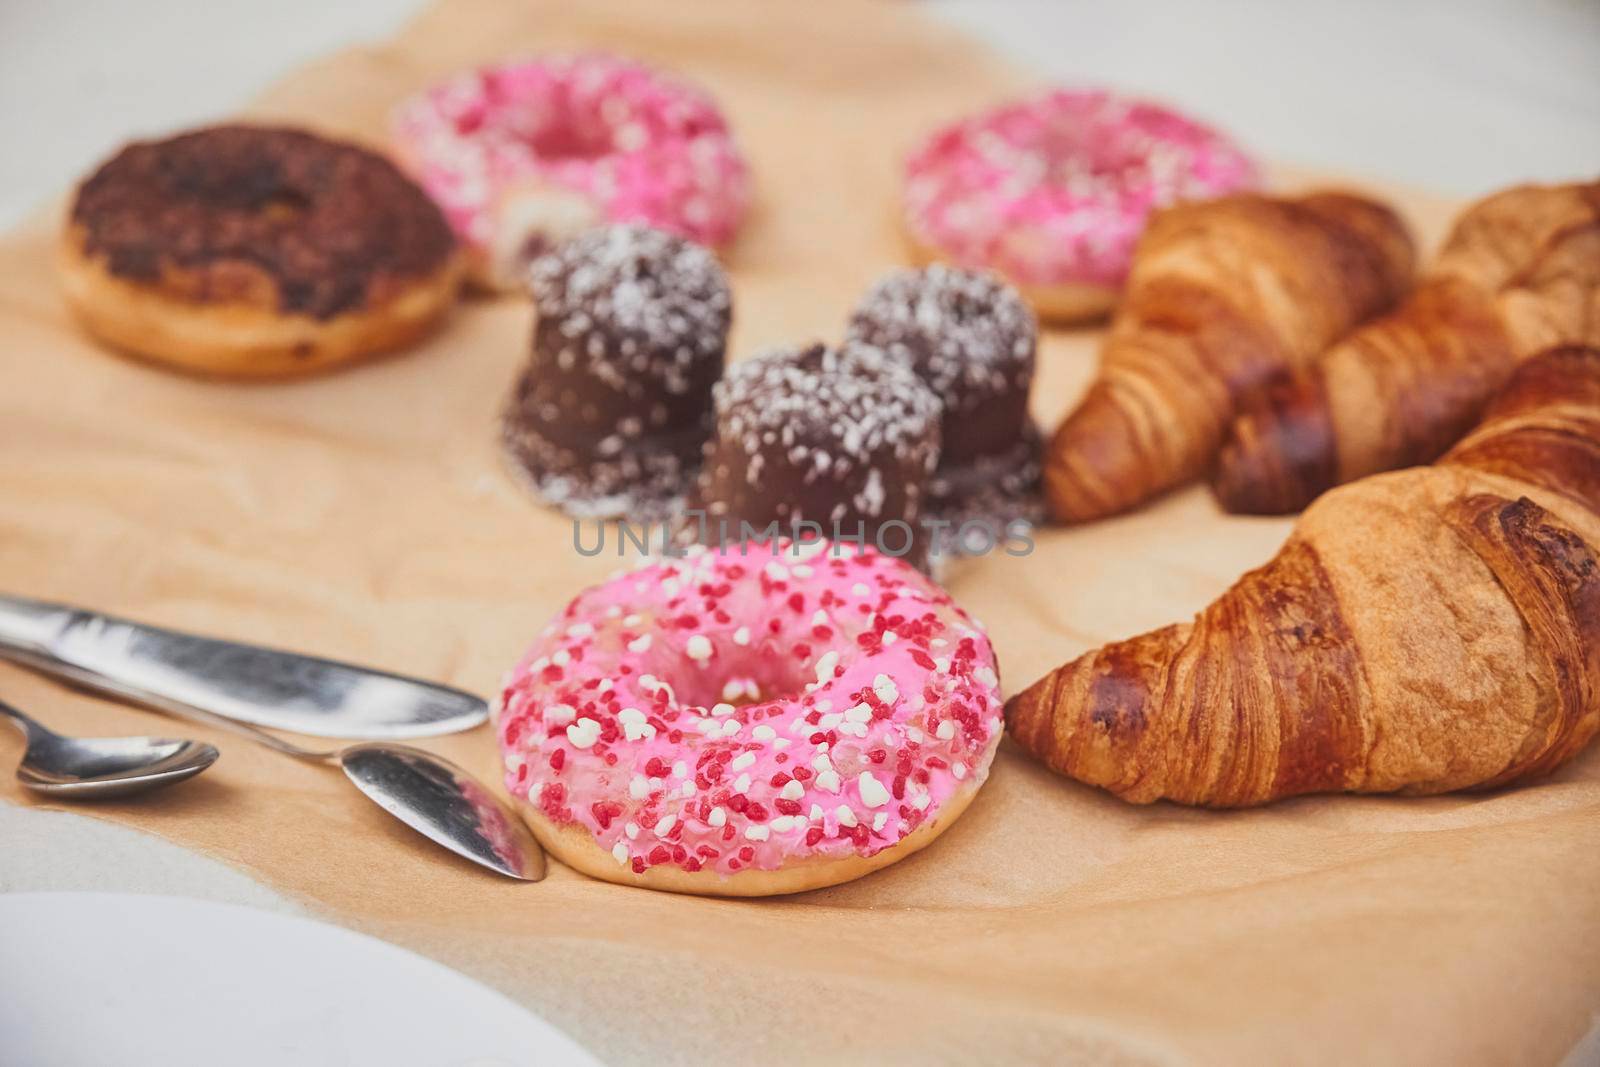 Donuts, croissants and sweets on craft paper.